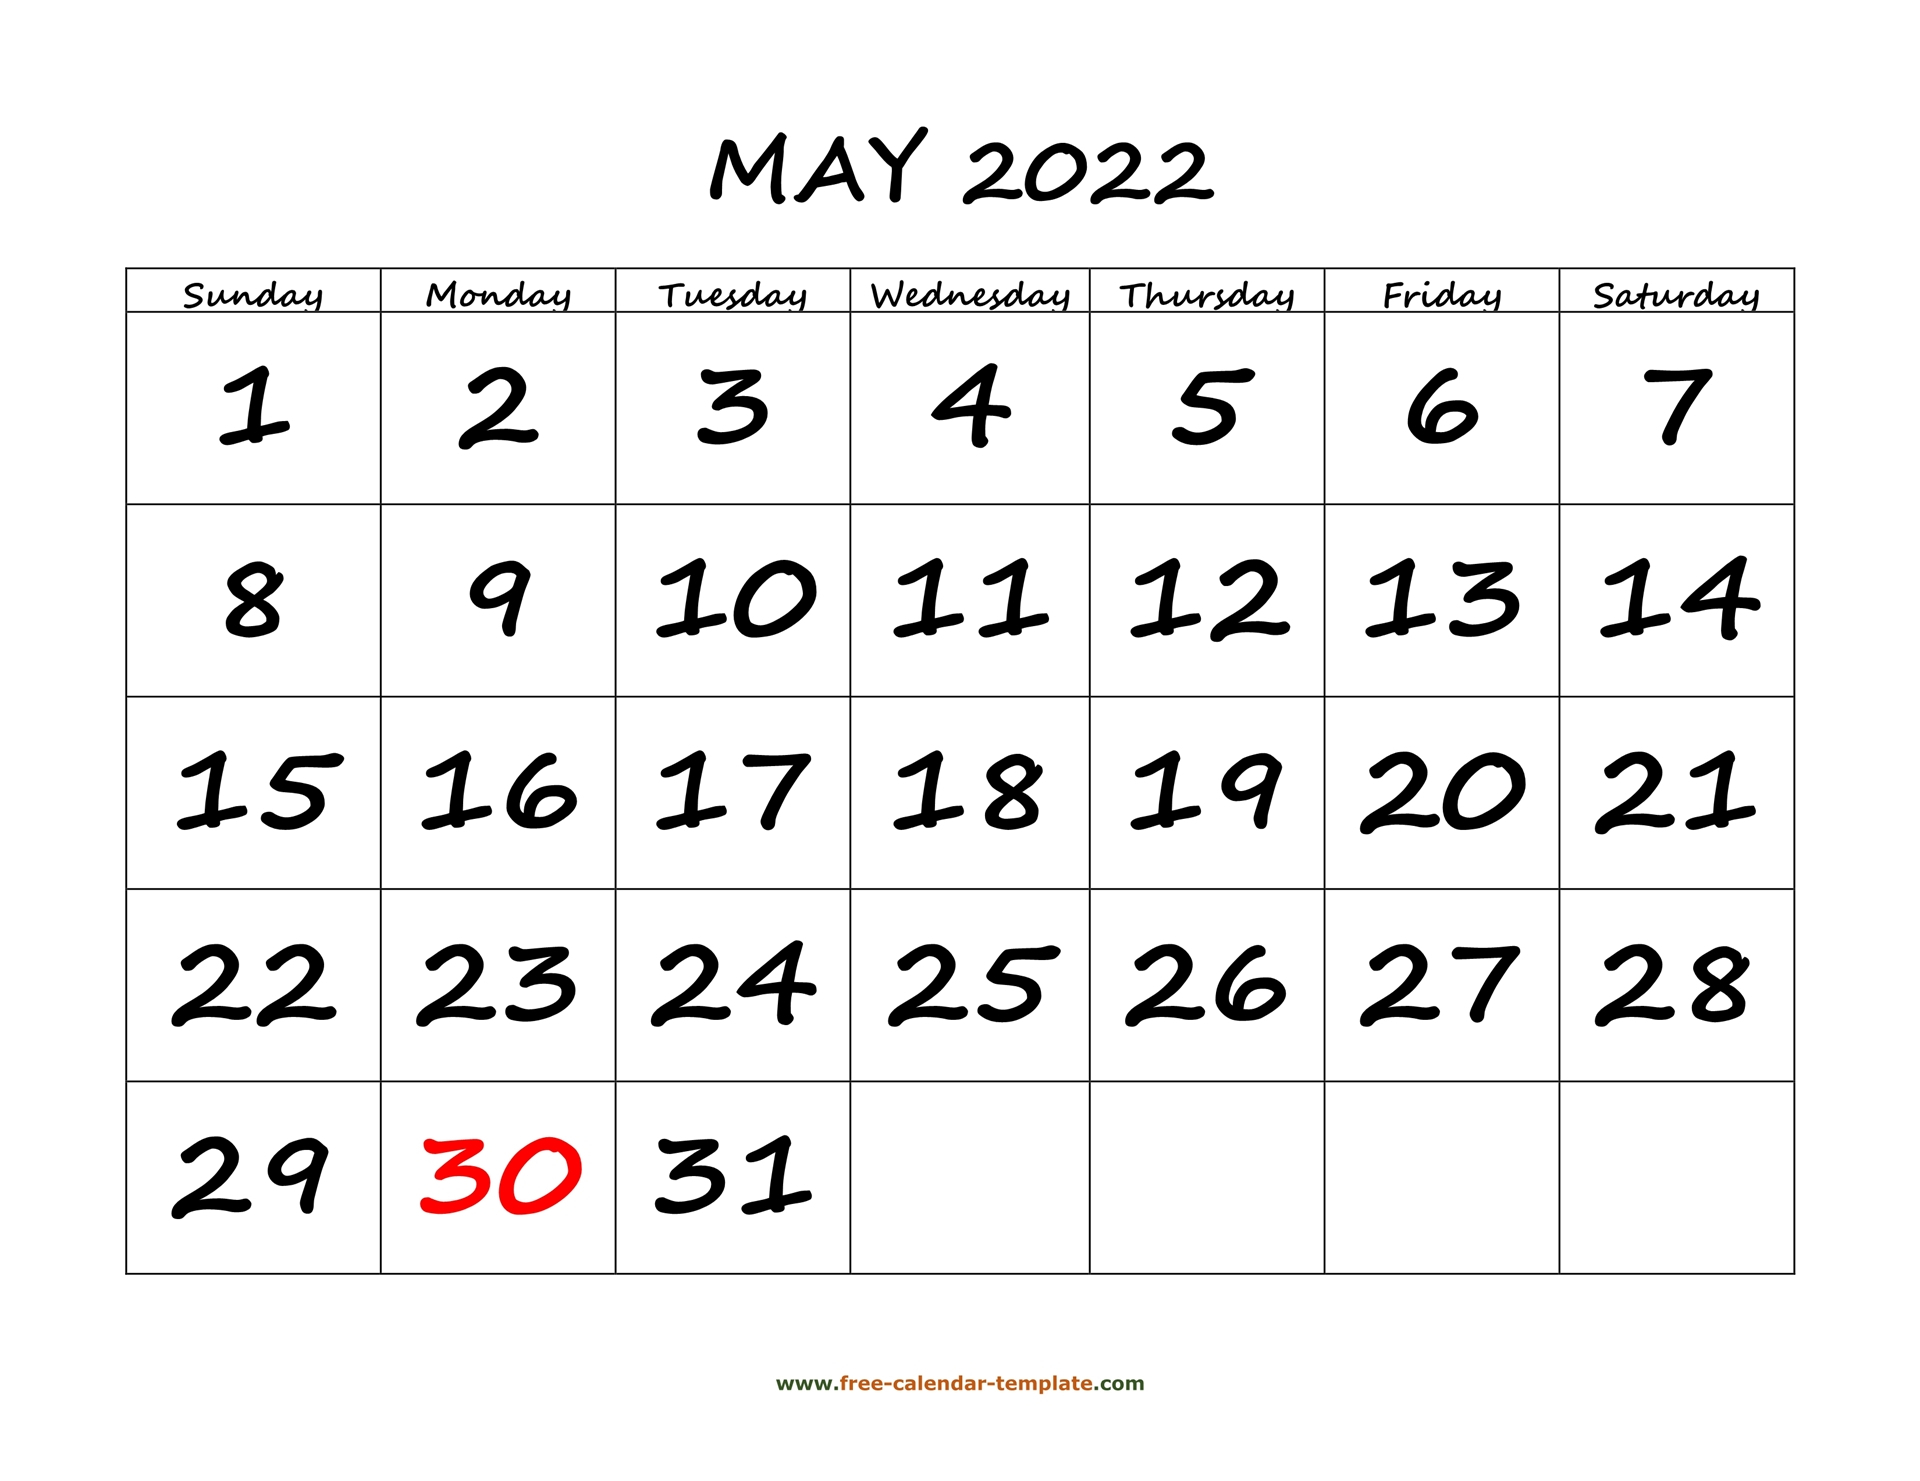 Catch May 2022 Calendar With Us Holidays